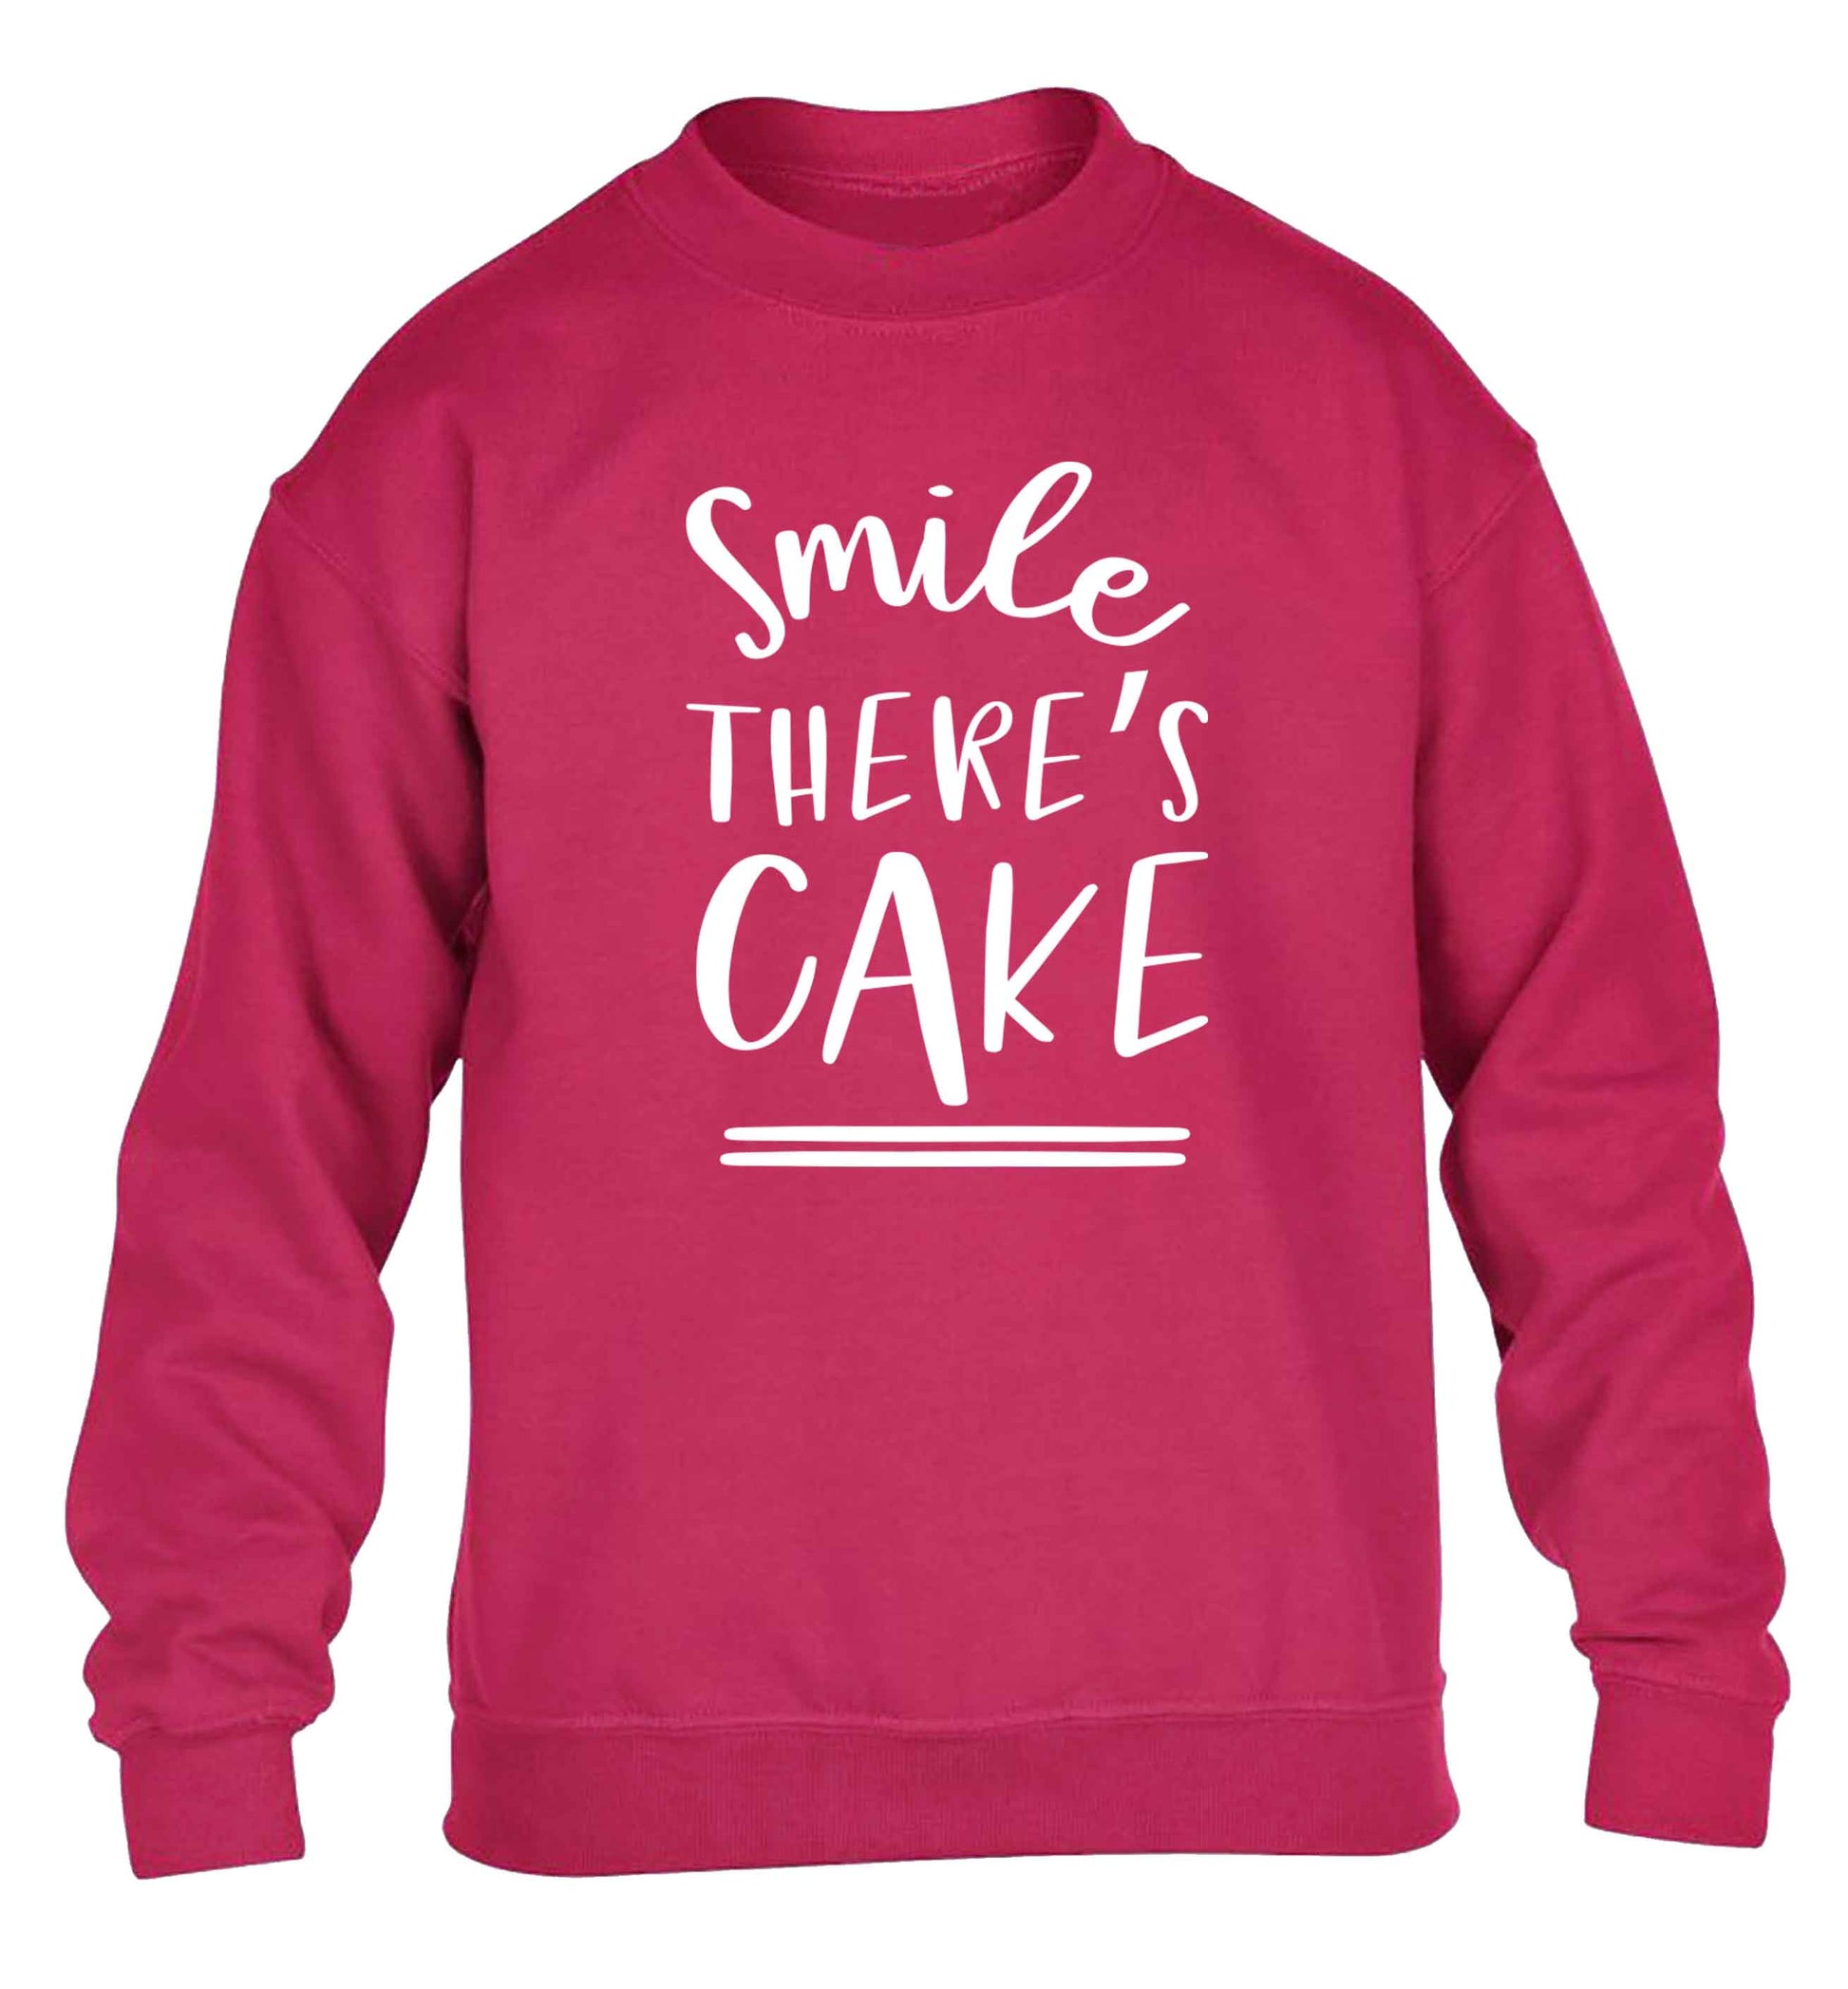 Smile there's cake children's pink sweater 12-13 Years